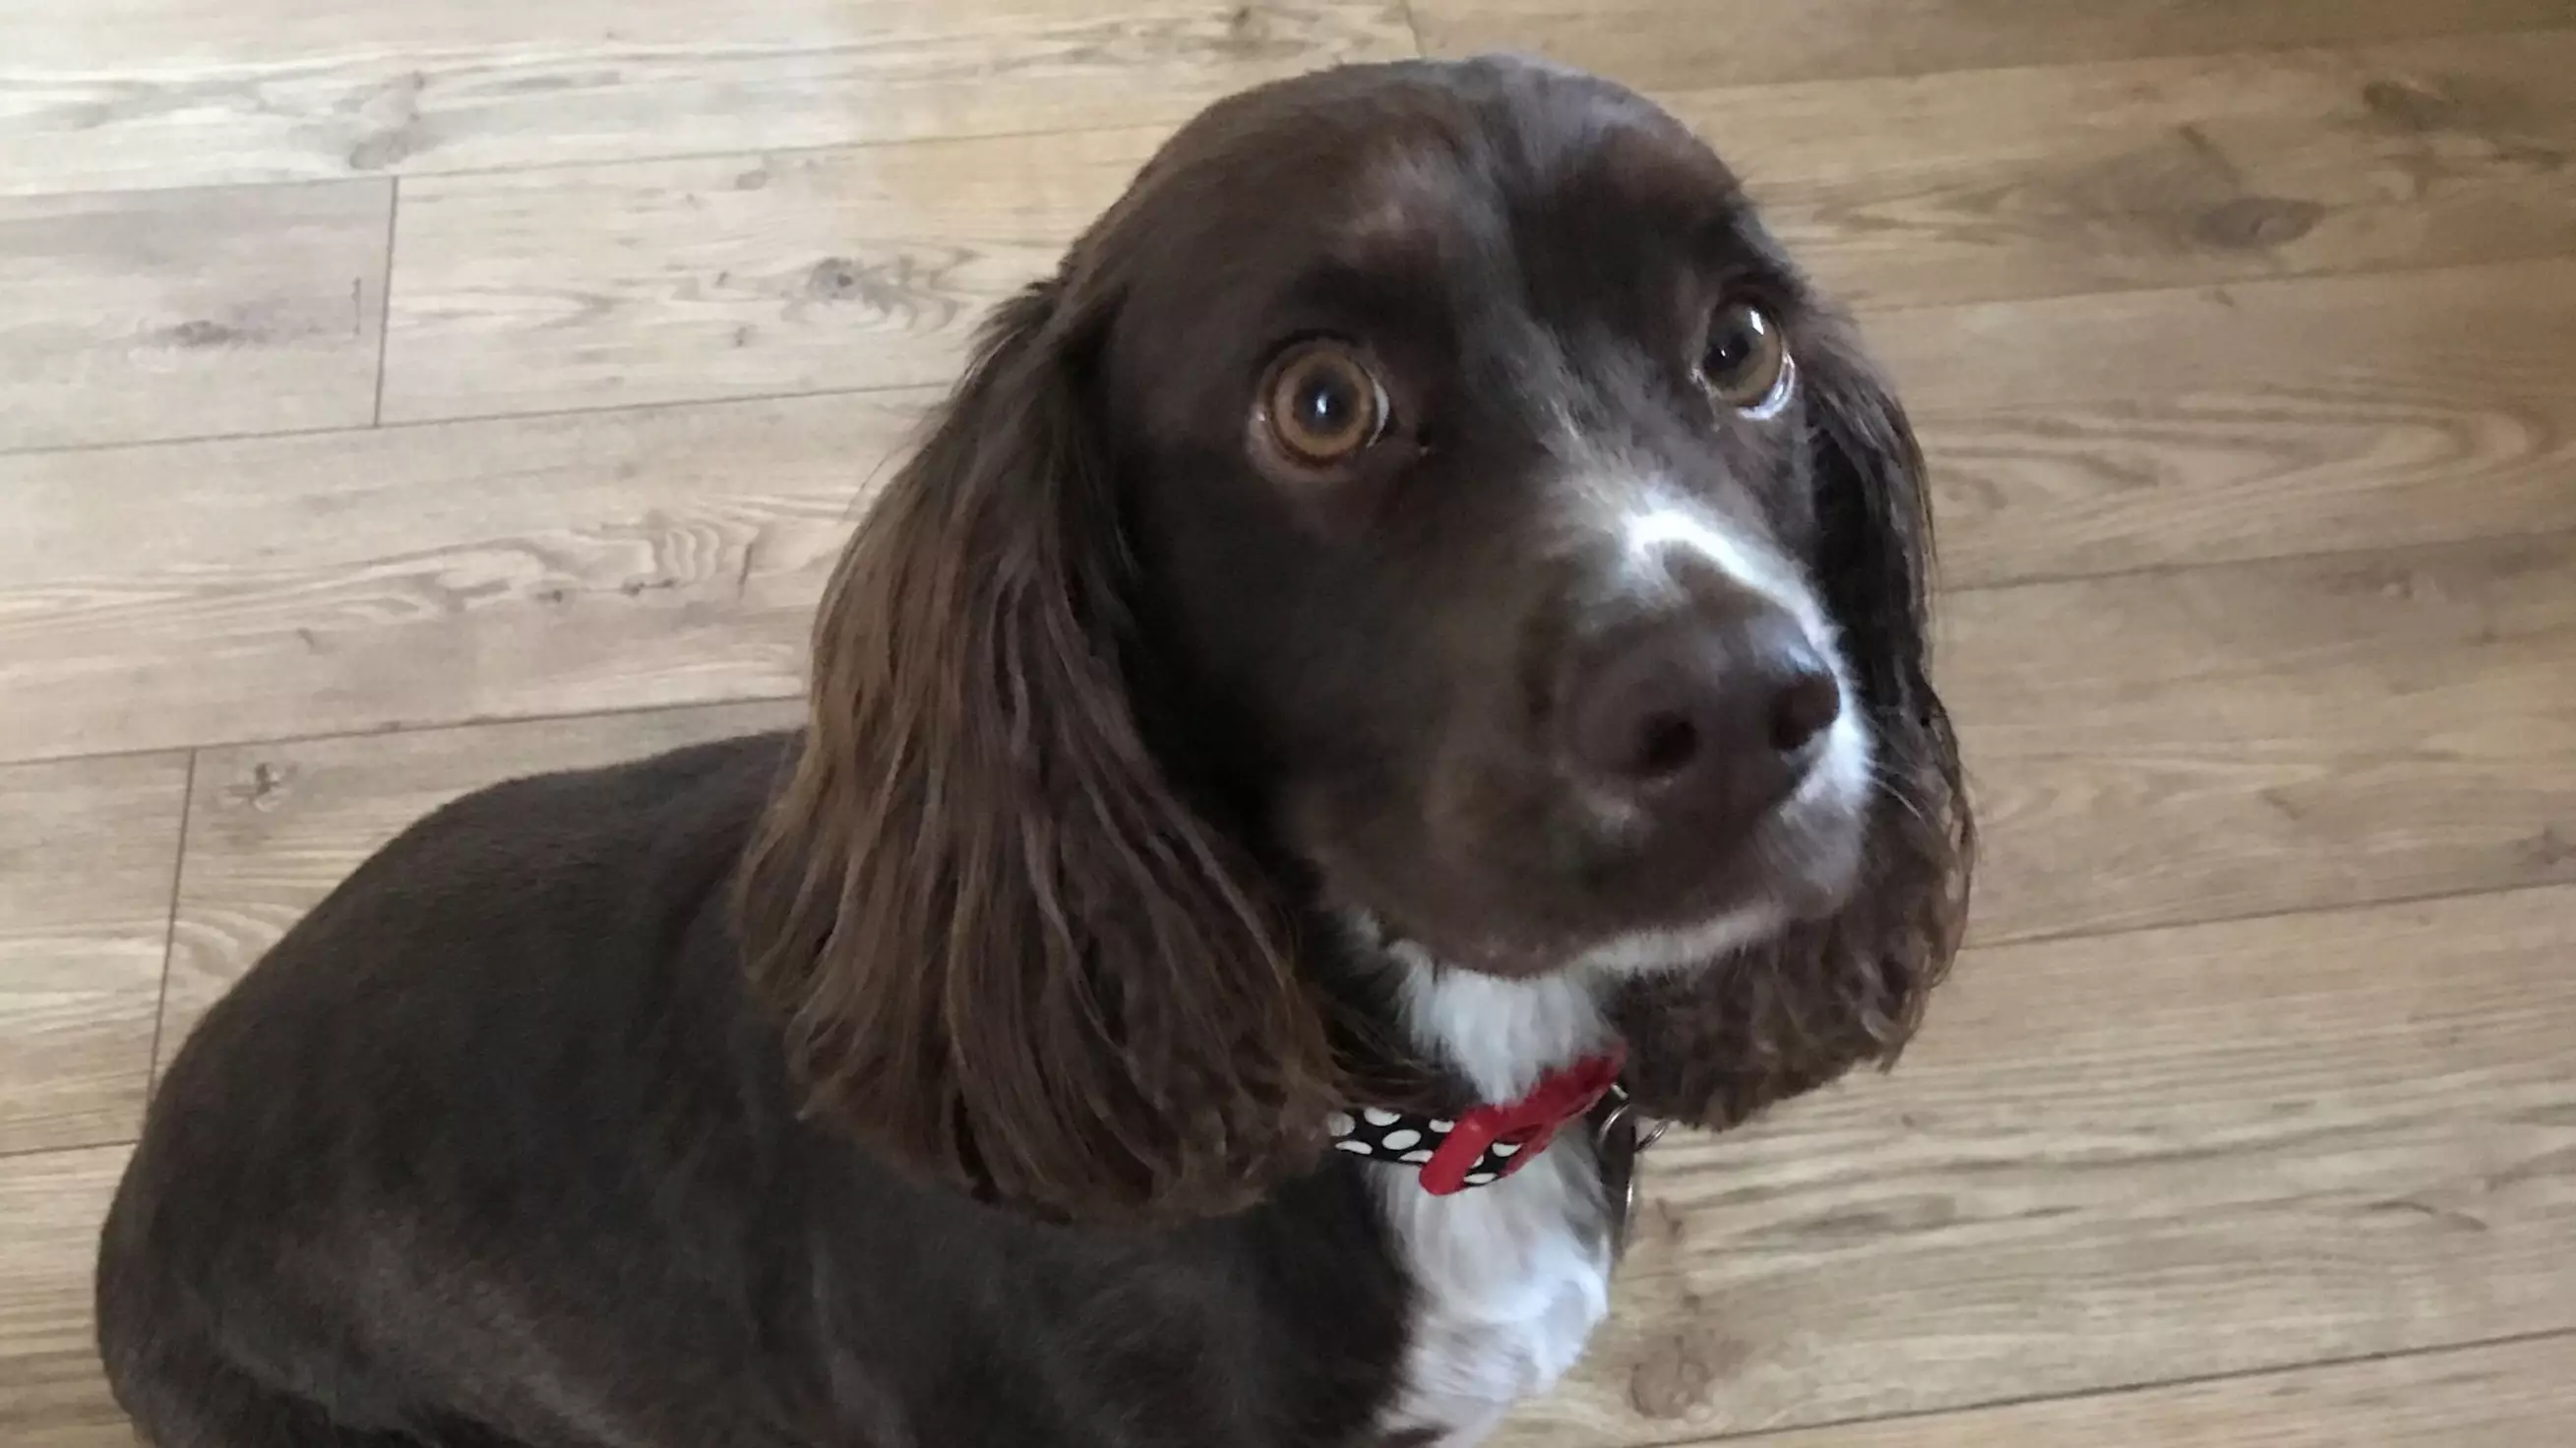 Dog Walker Forgets Ball - Cocker Spaniel Finds Dildo To Play With Instead